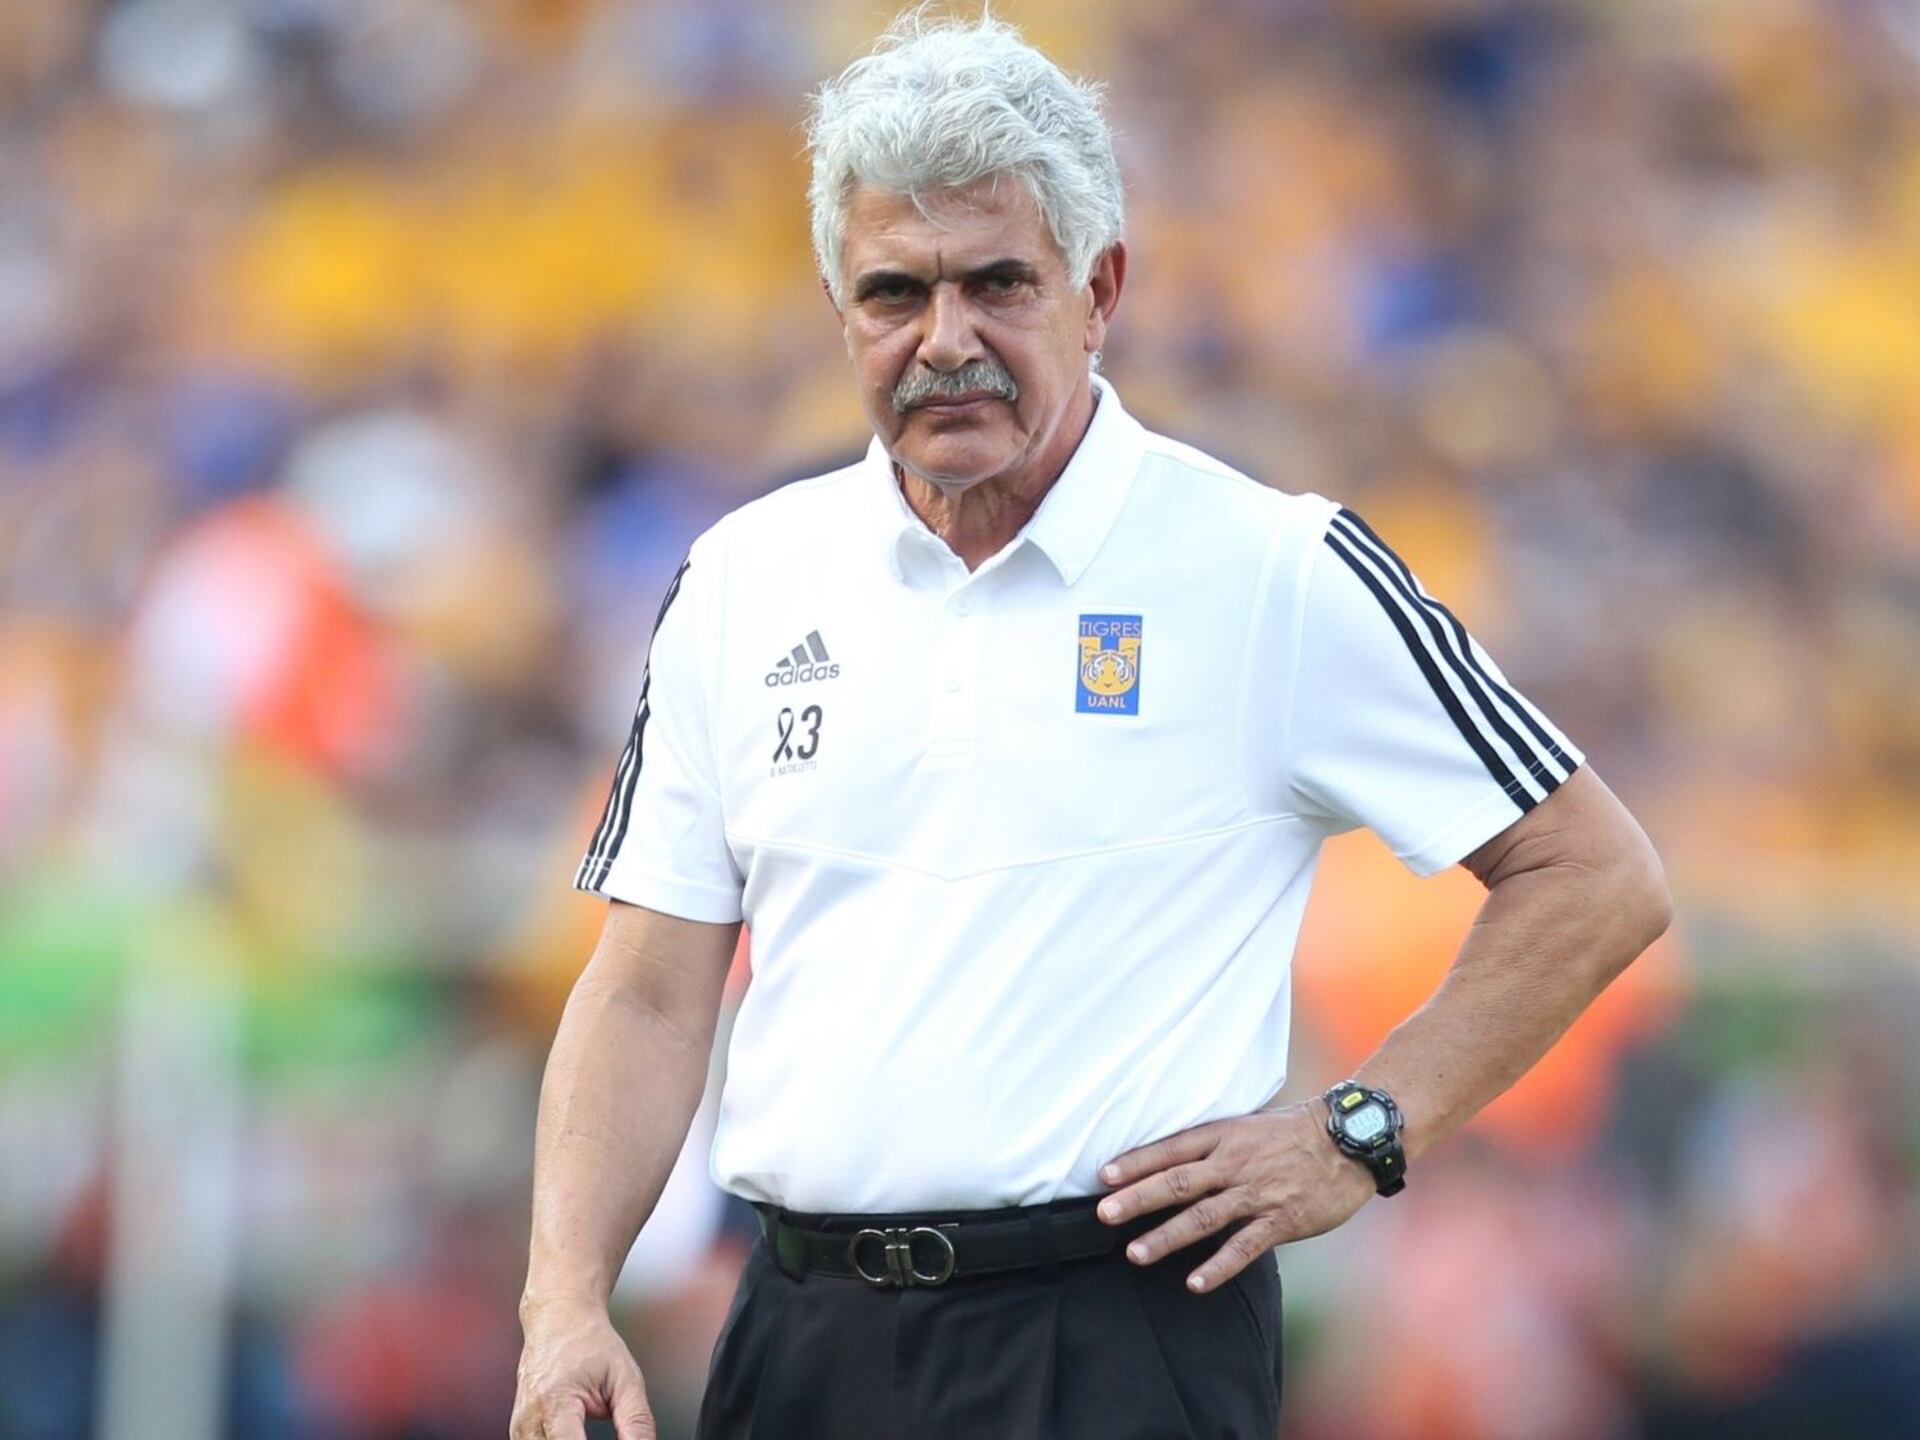 Another player will arrive in Club América if Ricardo Ferretti becomes their coach